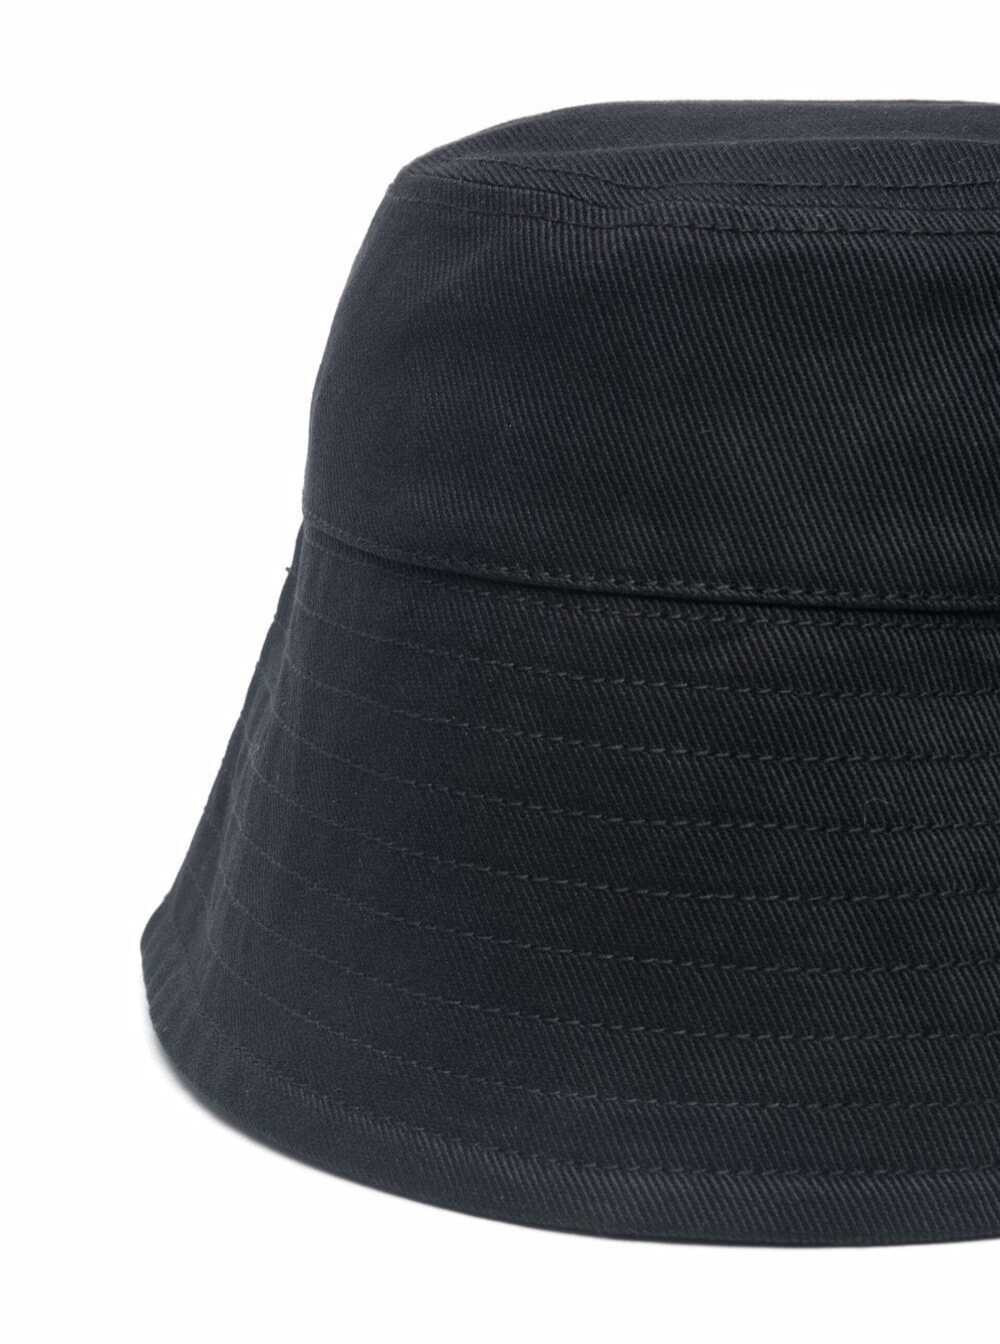 Shop Patou Black Bucket Hat With Wide Brim And Lettering Print In Cotton Woman